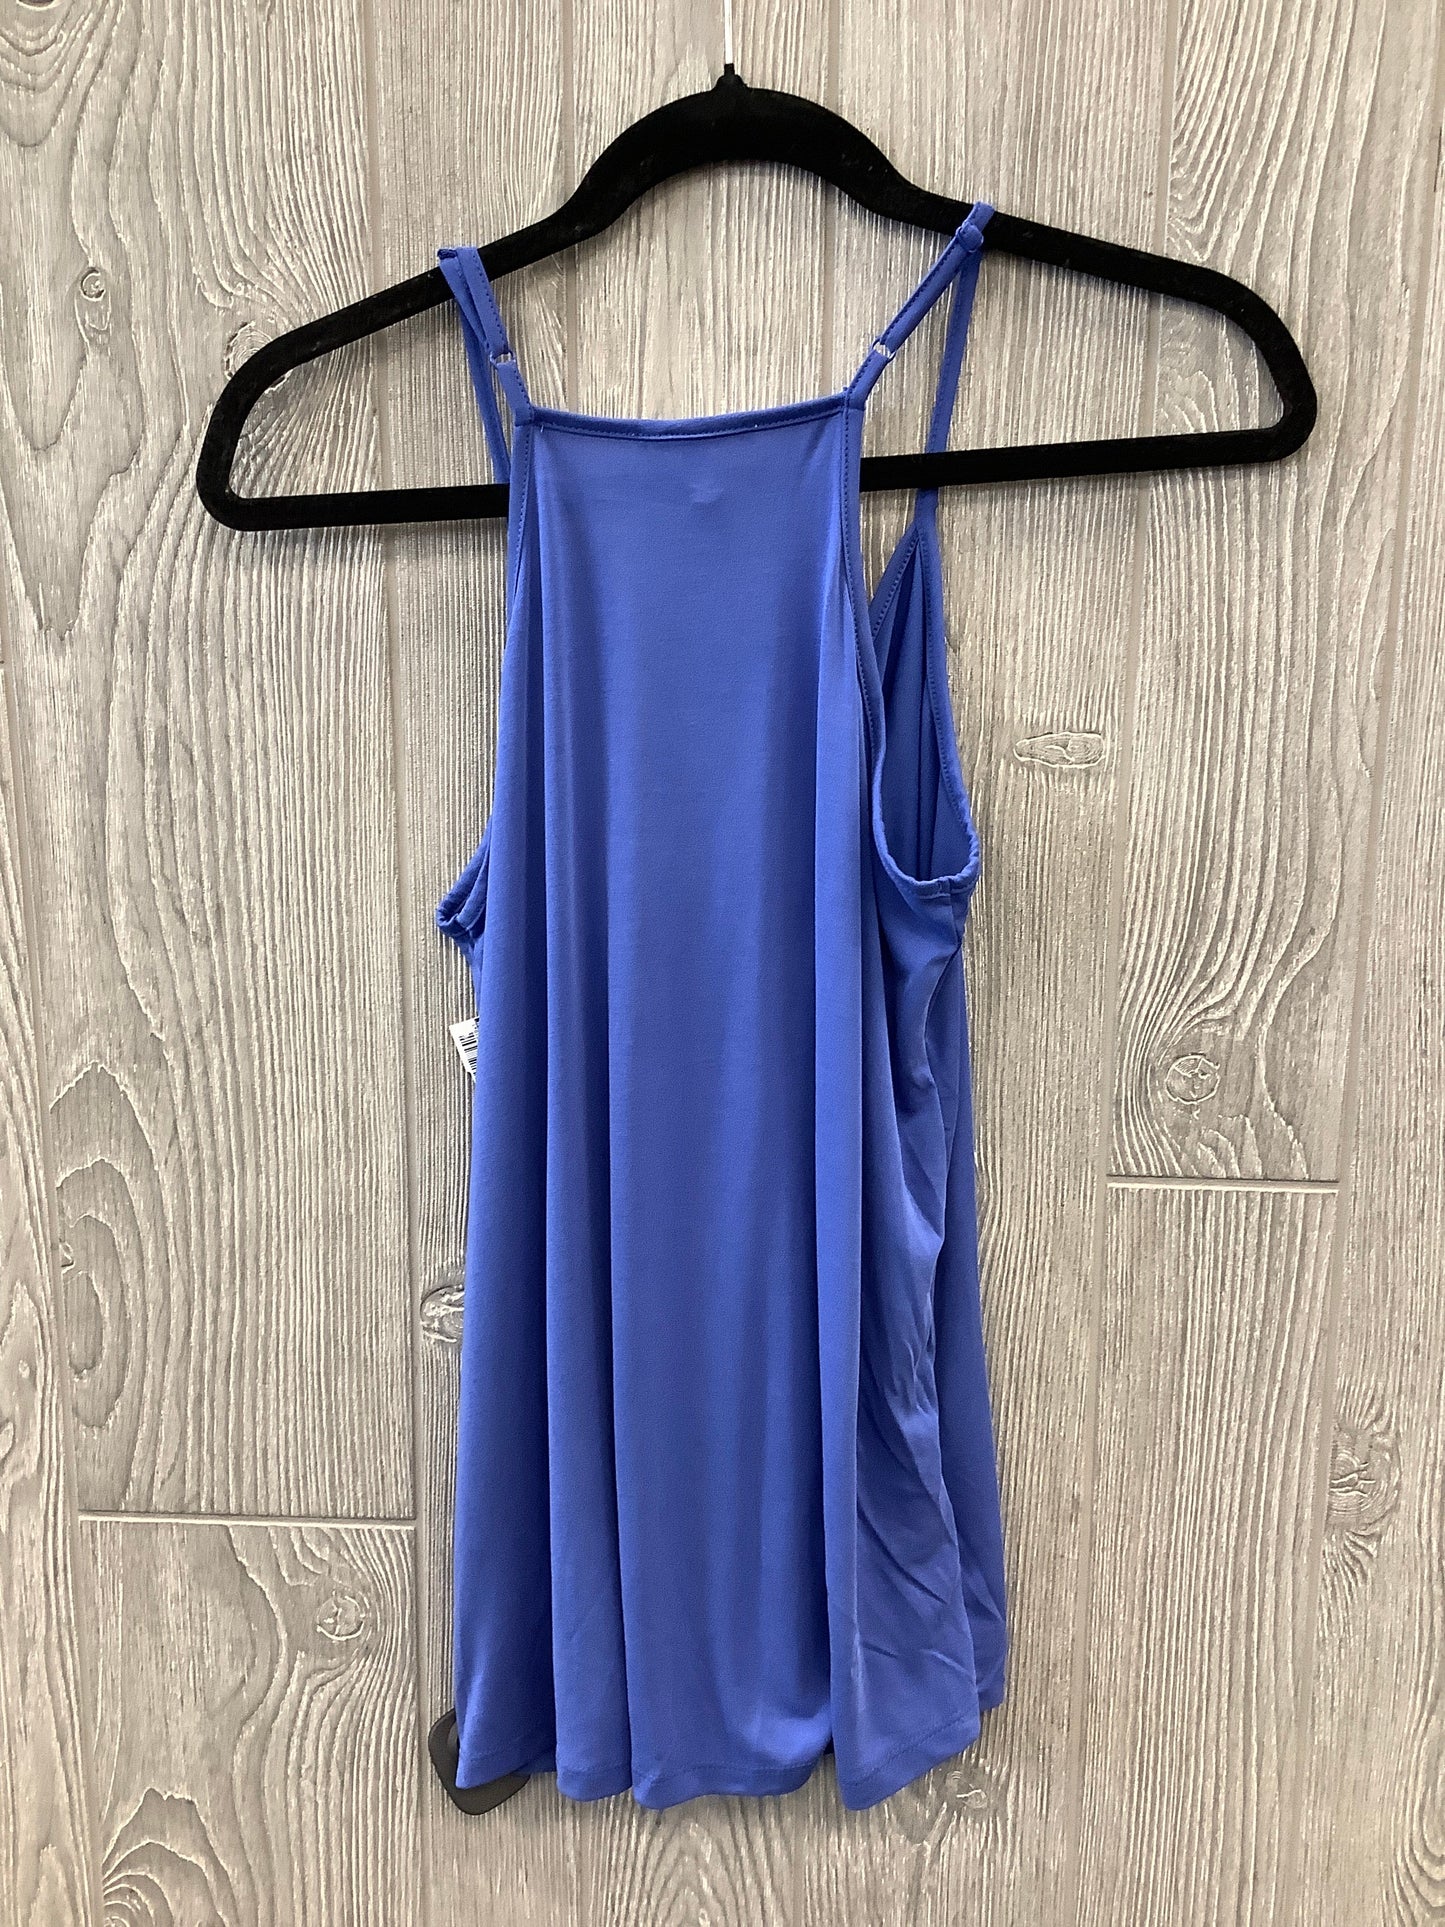 Blue Top Sleeveless Maurices, Size S